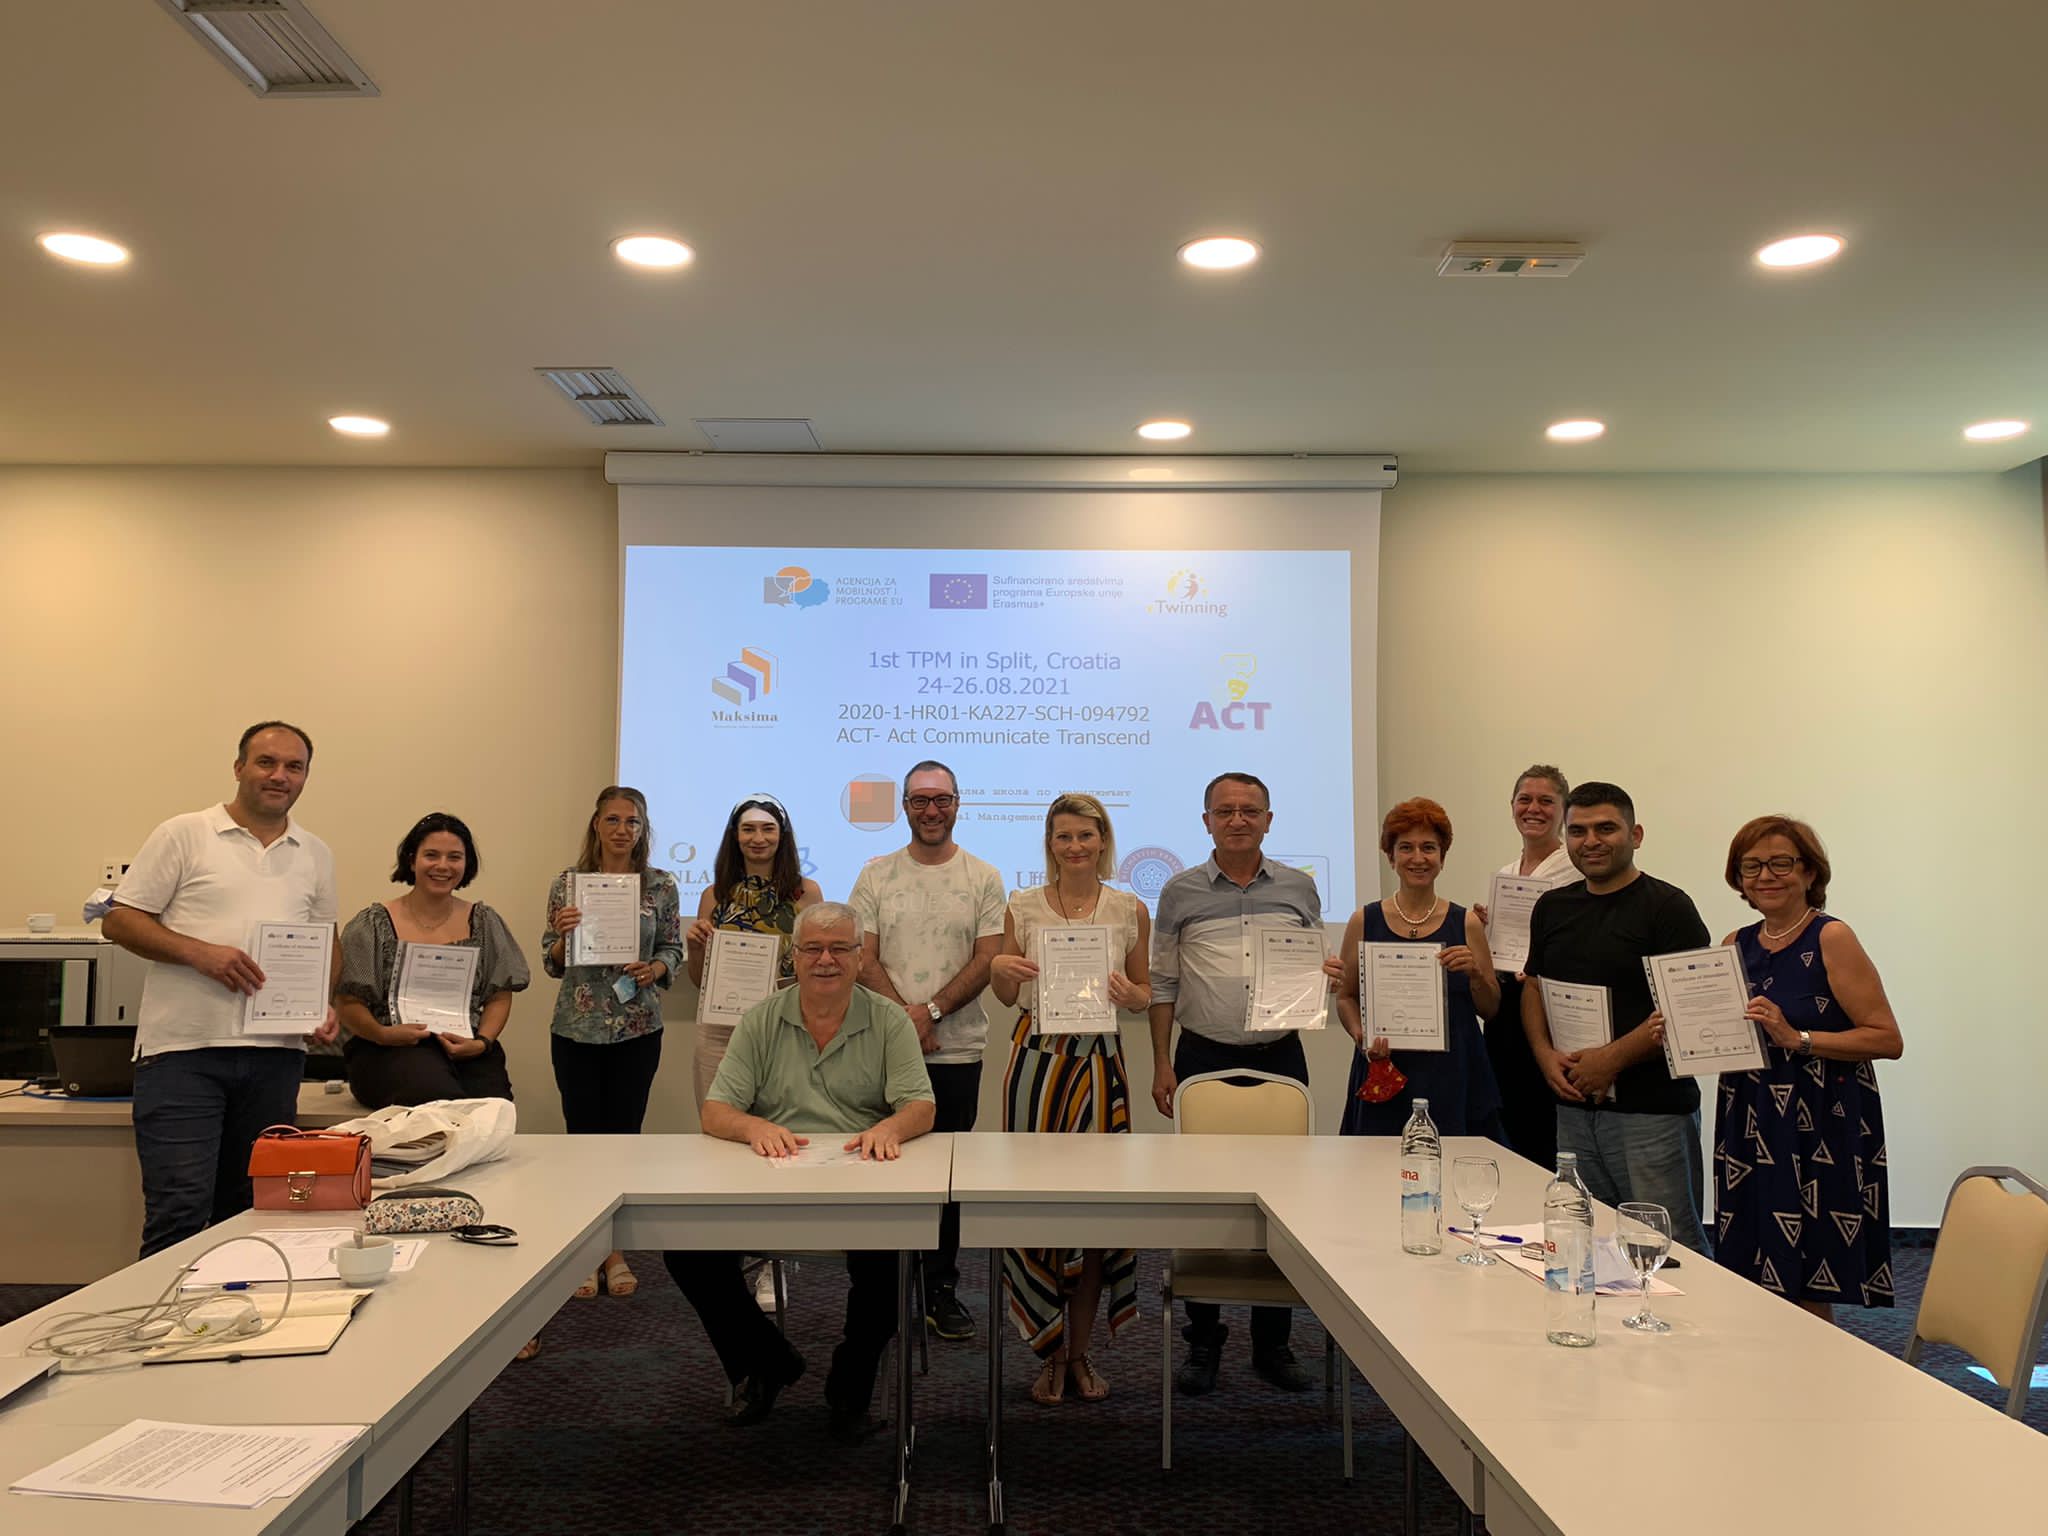 1ST TPM - ACT: ACT Communicate Transcend Project's Kick off meeting took place in Split / Croatia 